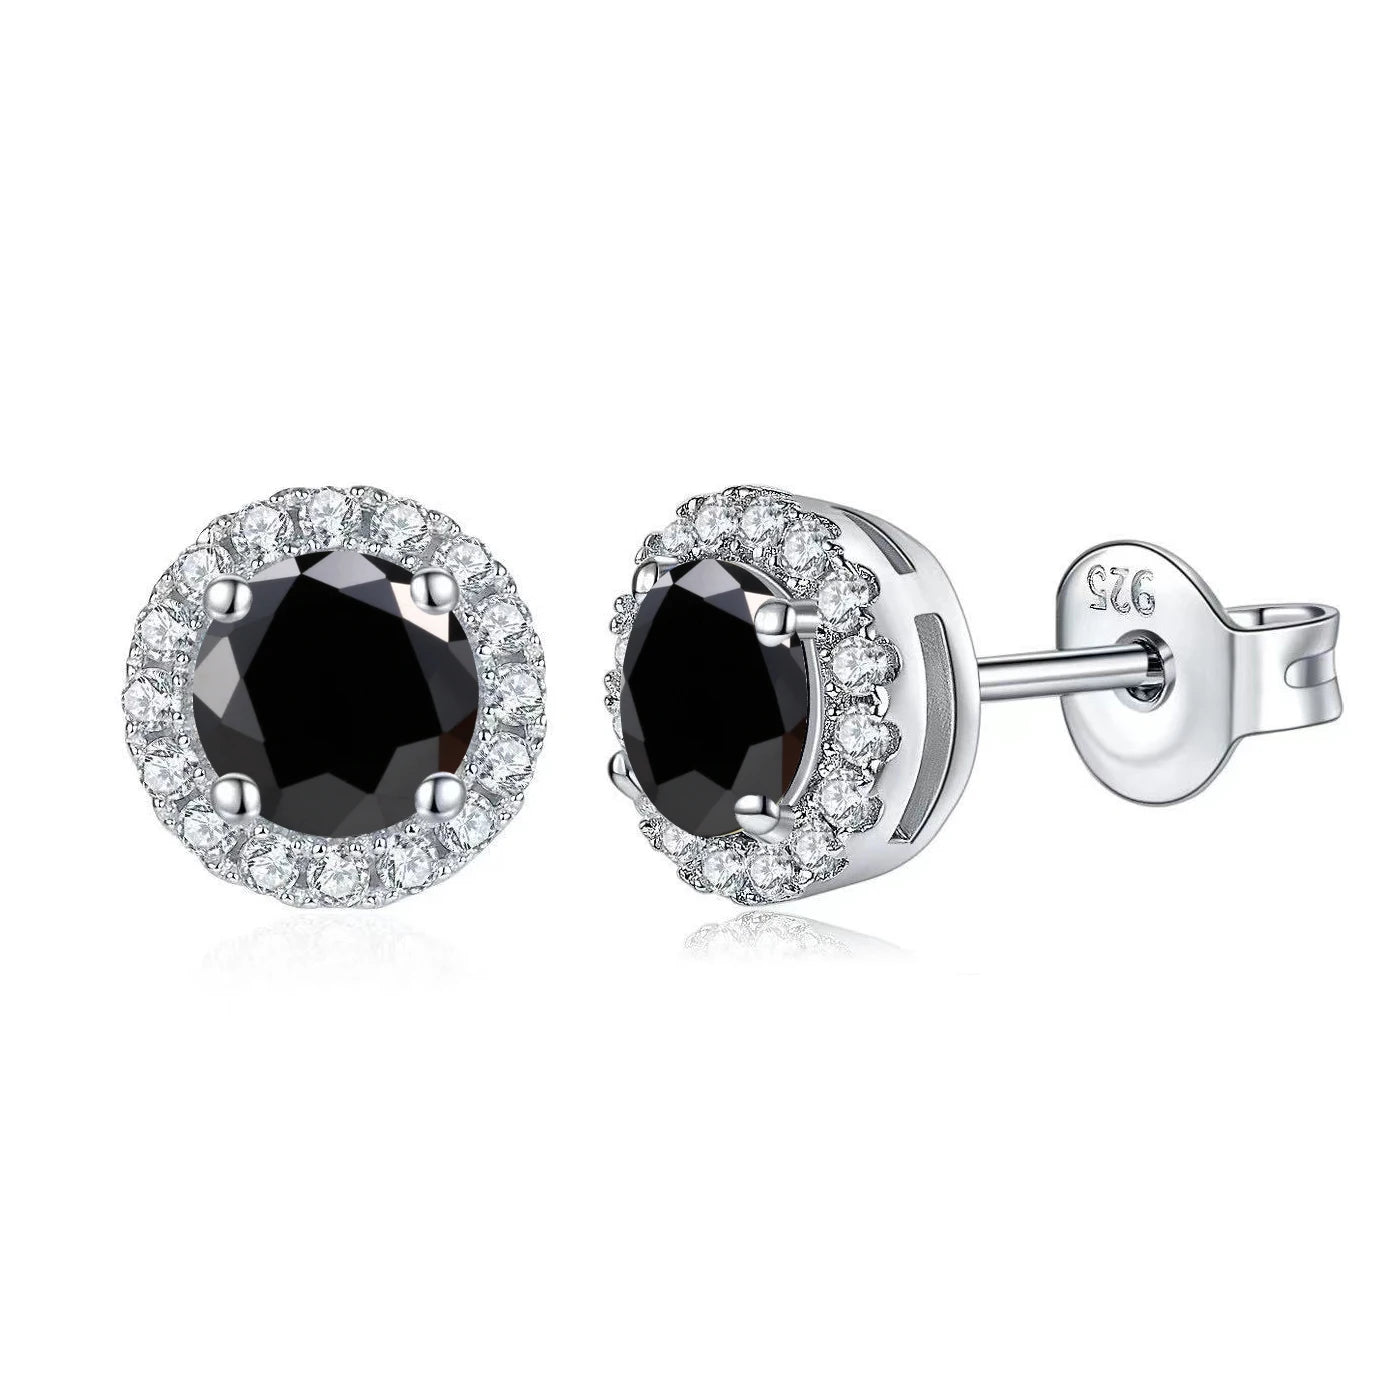 GEM'S BALLET 1.0CT Brilliant Round Classic Halo 925 Silver Moissanite Earring Studs Certified Moissanite Earrings Christmas Gift Black 925 Sterling Silver CHINA